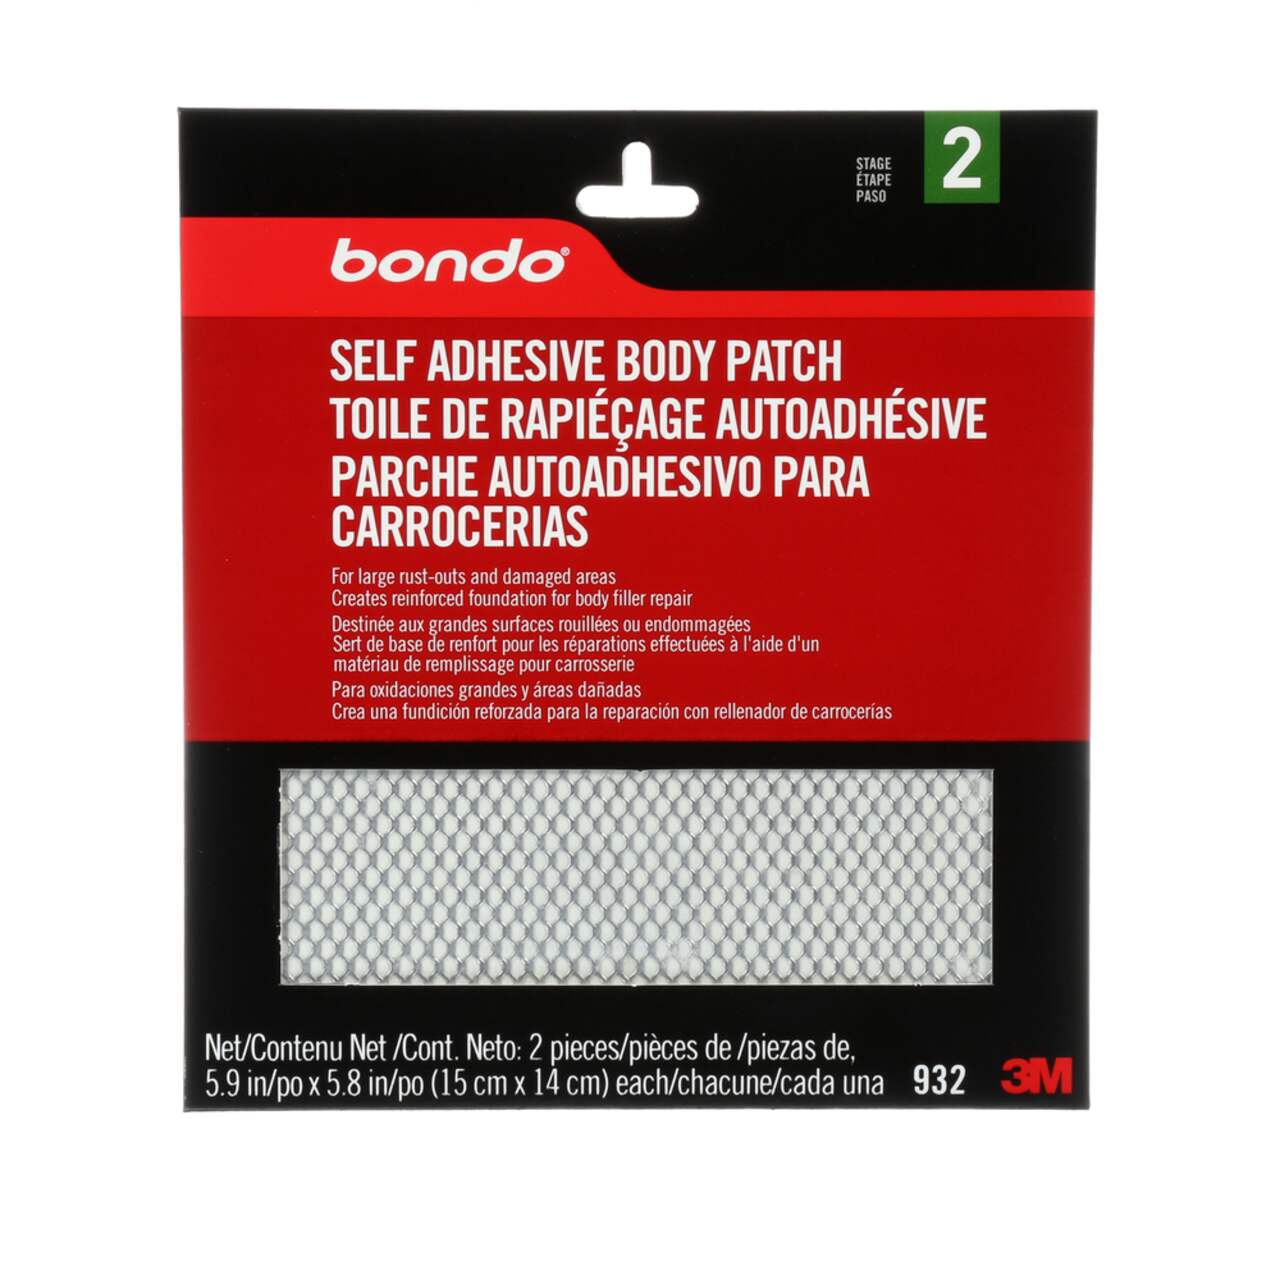 https://media-www.canadiantire.ca/product/automotive/car-care-accessories/auto-body-repair/0475813/bondo-adhesive-body-patch-efa22521-c28a-4427-8555-5ca3f9cb6ed2.png?imdensity=1&imwidth=640&impolicy=mZoom